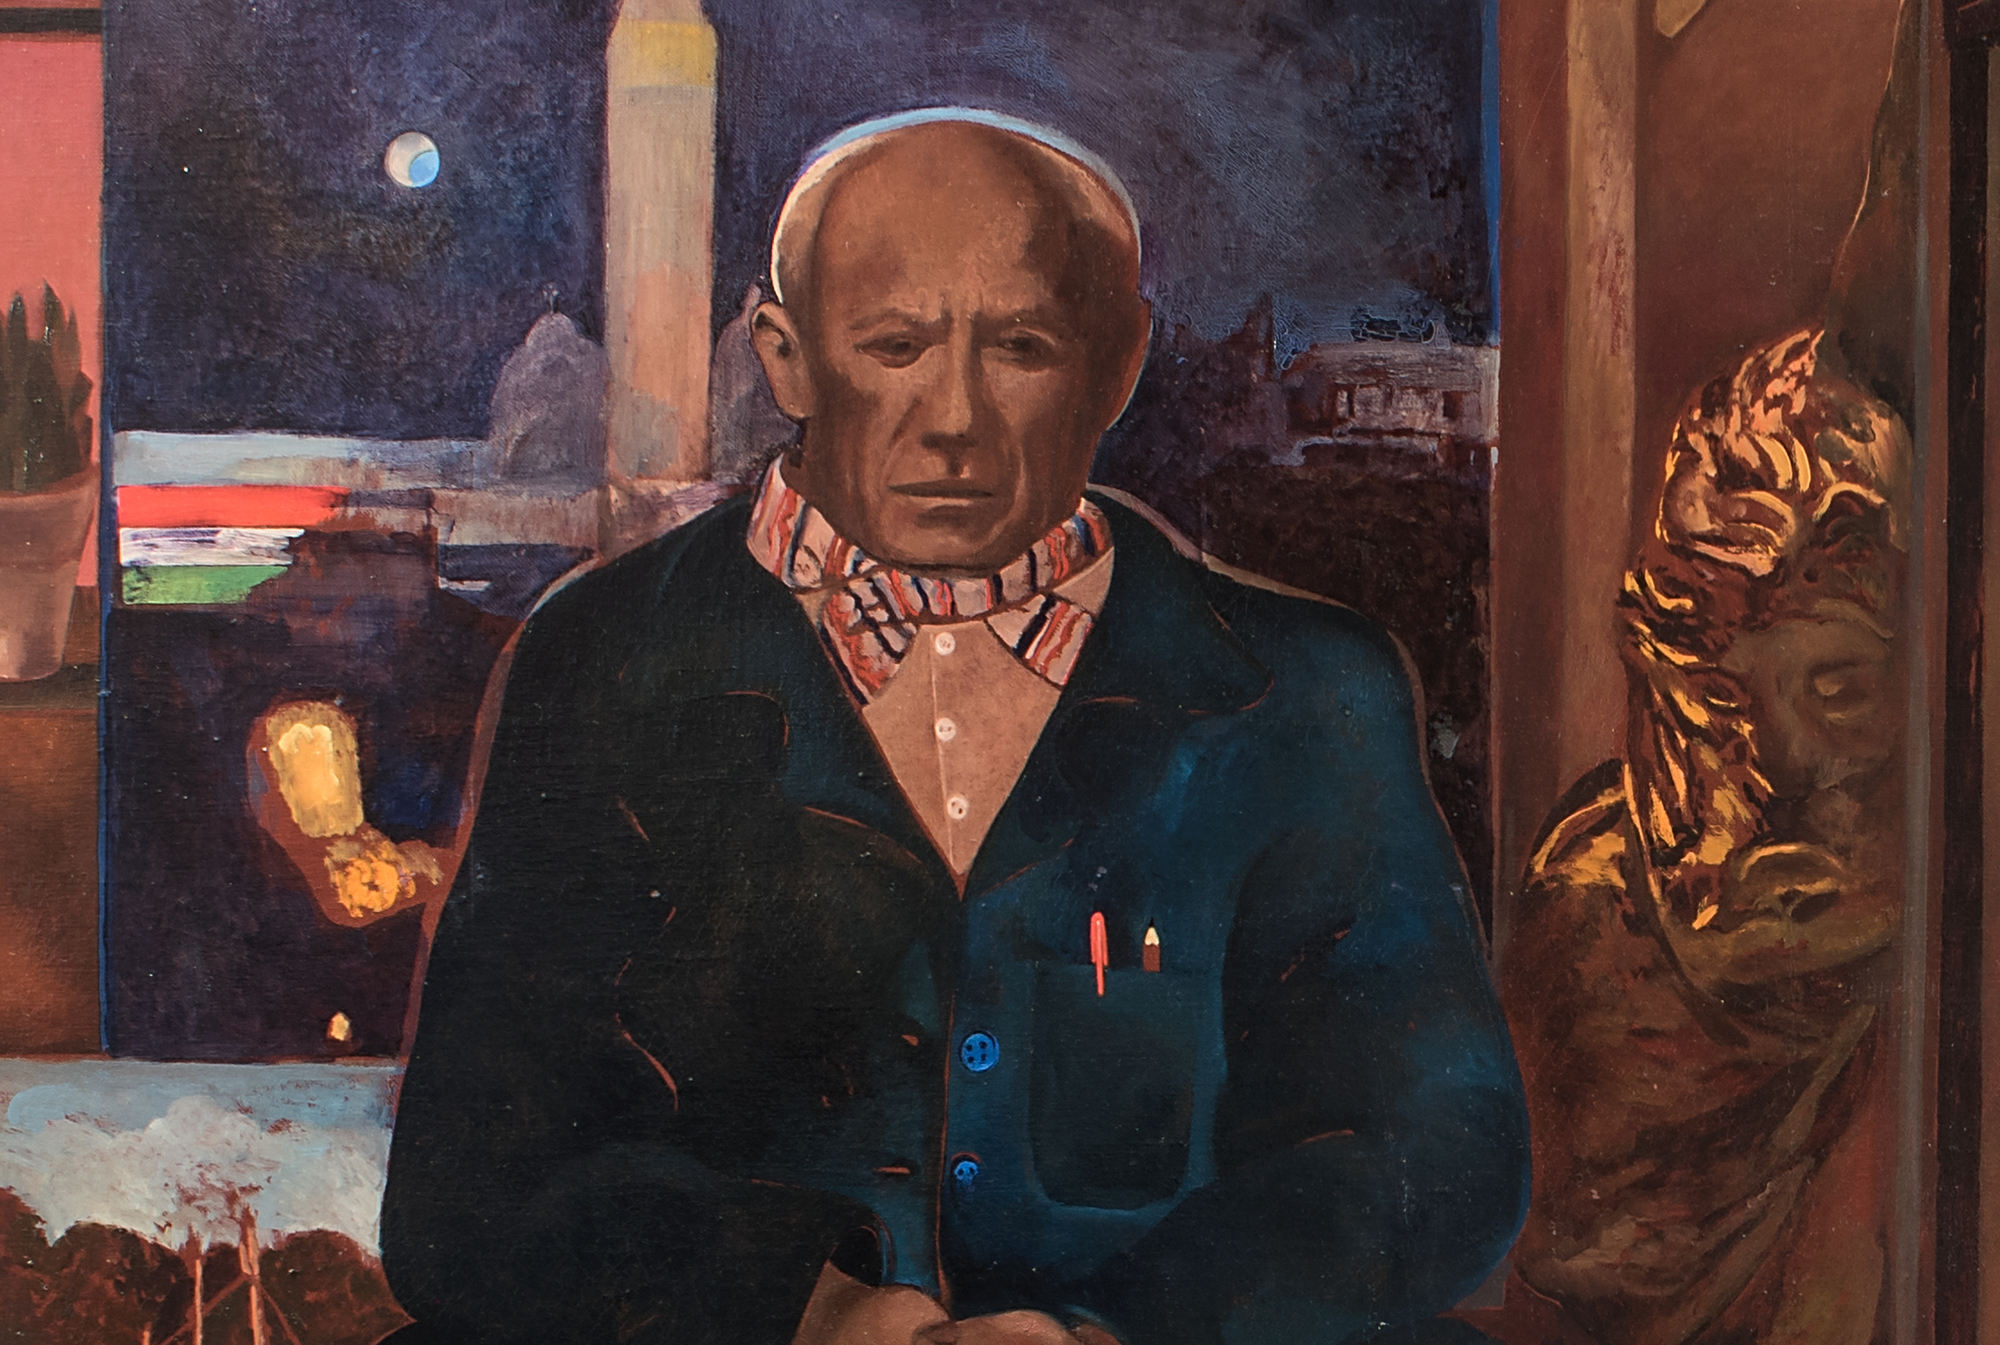 Pablo Picasso paints a portrait of his sitter Giorgio De Chirico in a room filled with classical antiquities, neoclassical sculptures and impressionist paintings. The artist dreams of his own glory, which is symbolized by the masterpieces in the room – the statue of Victory by Michelangelo, an Impressionist artwork leaning in a corner, and the painting behind the sitter that symbolizes human knowledge. Yet, this is all meant ironically. De Chirico only sits in for Pellegrini himself, who mocks his own fears and phobias, by sitting in a room in which every person and artwork in the painting have already achieved their glory. 
<br>
<br>“Yes, irony is one of the elements of my painting. I make fun of myself and my neurotic fears and phobias and I turn the situation with ironic if not at times hilarious details. I placed a cat, for example, with phosphorescent eyes in a bucolic scene, or in the subject of Carnival I mix death, ridicule and joking.” (Antonio Monda, “Interview with Max Pellegrini,” in Max Pellegrini, ed. Danilo Eccher, 2014